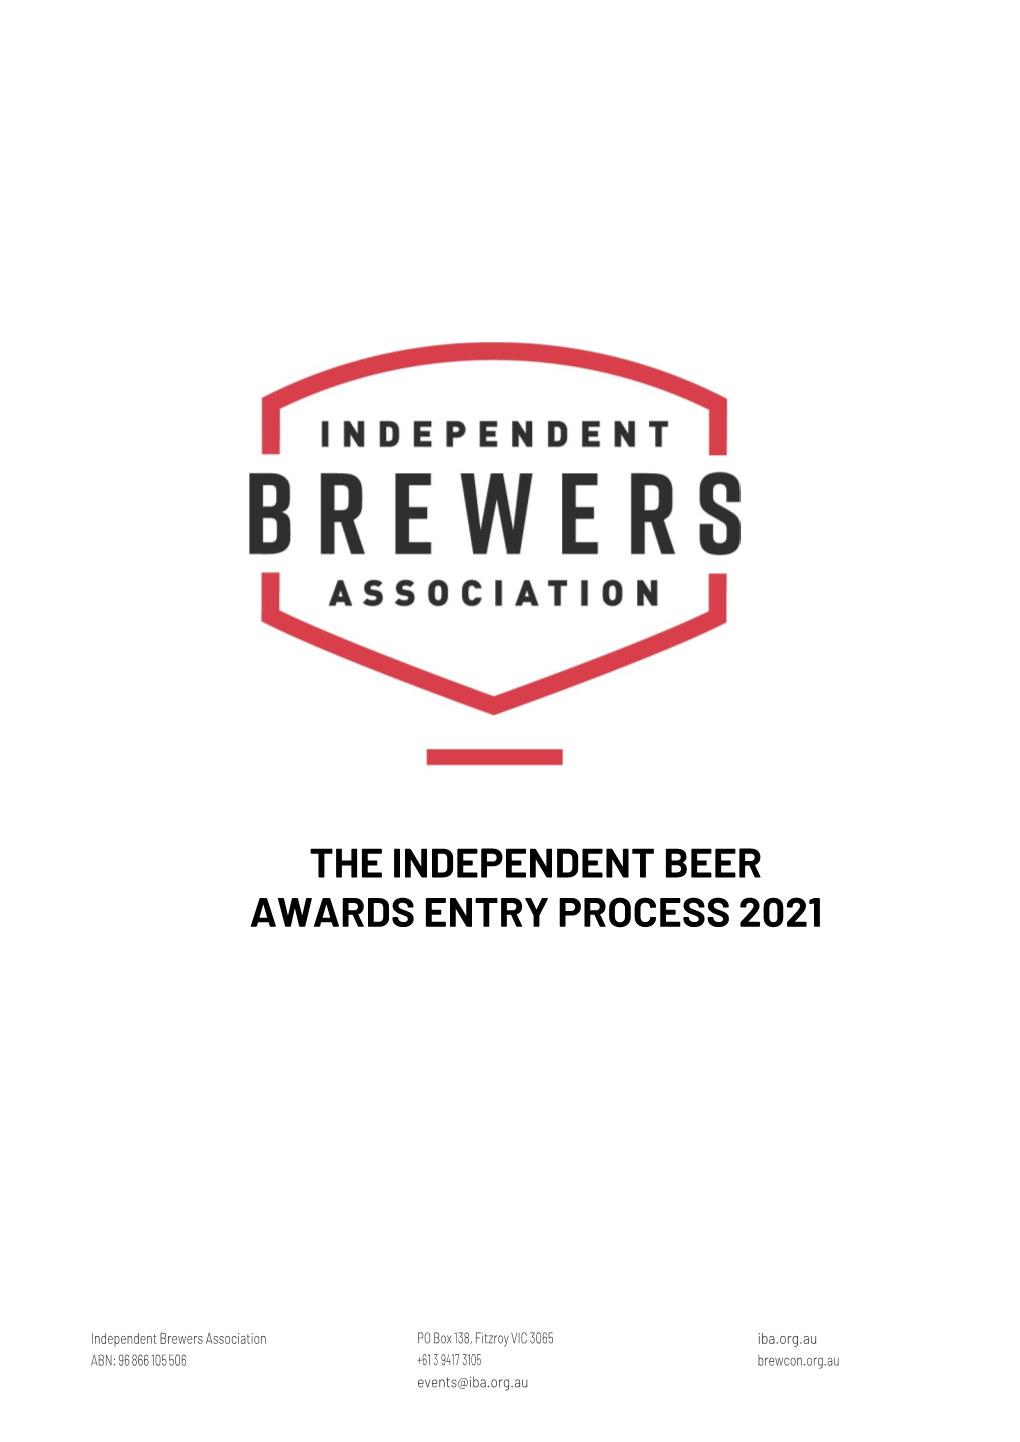 The Independent Beer Awards Entry Process 2021